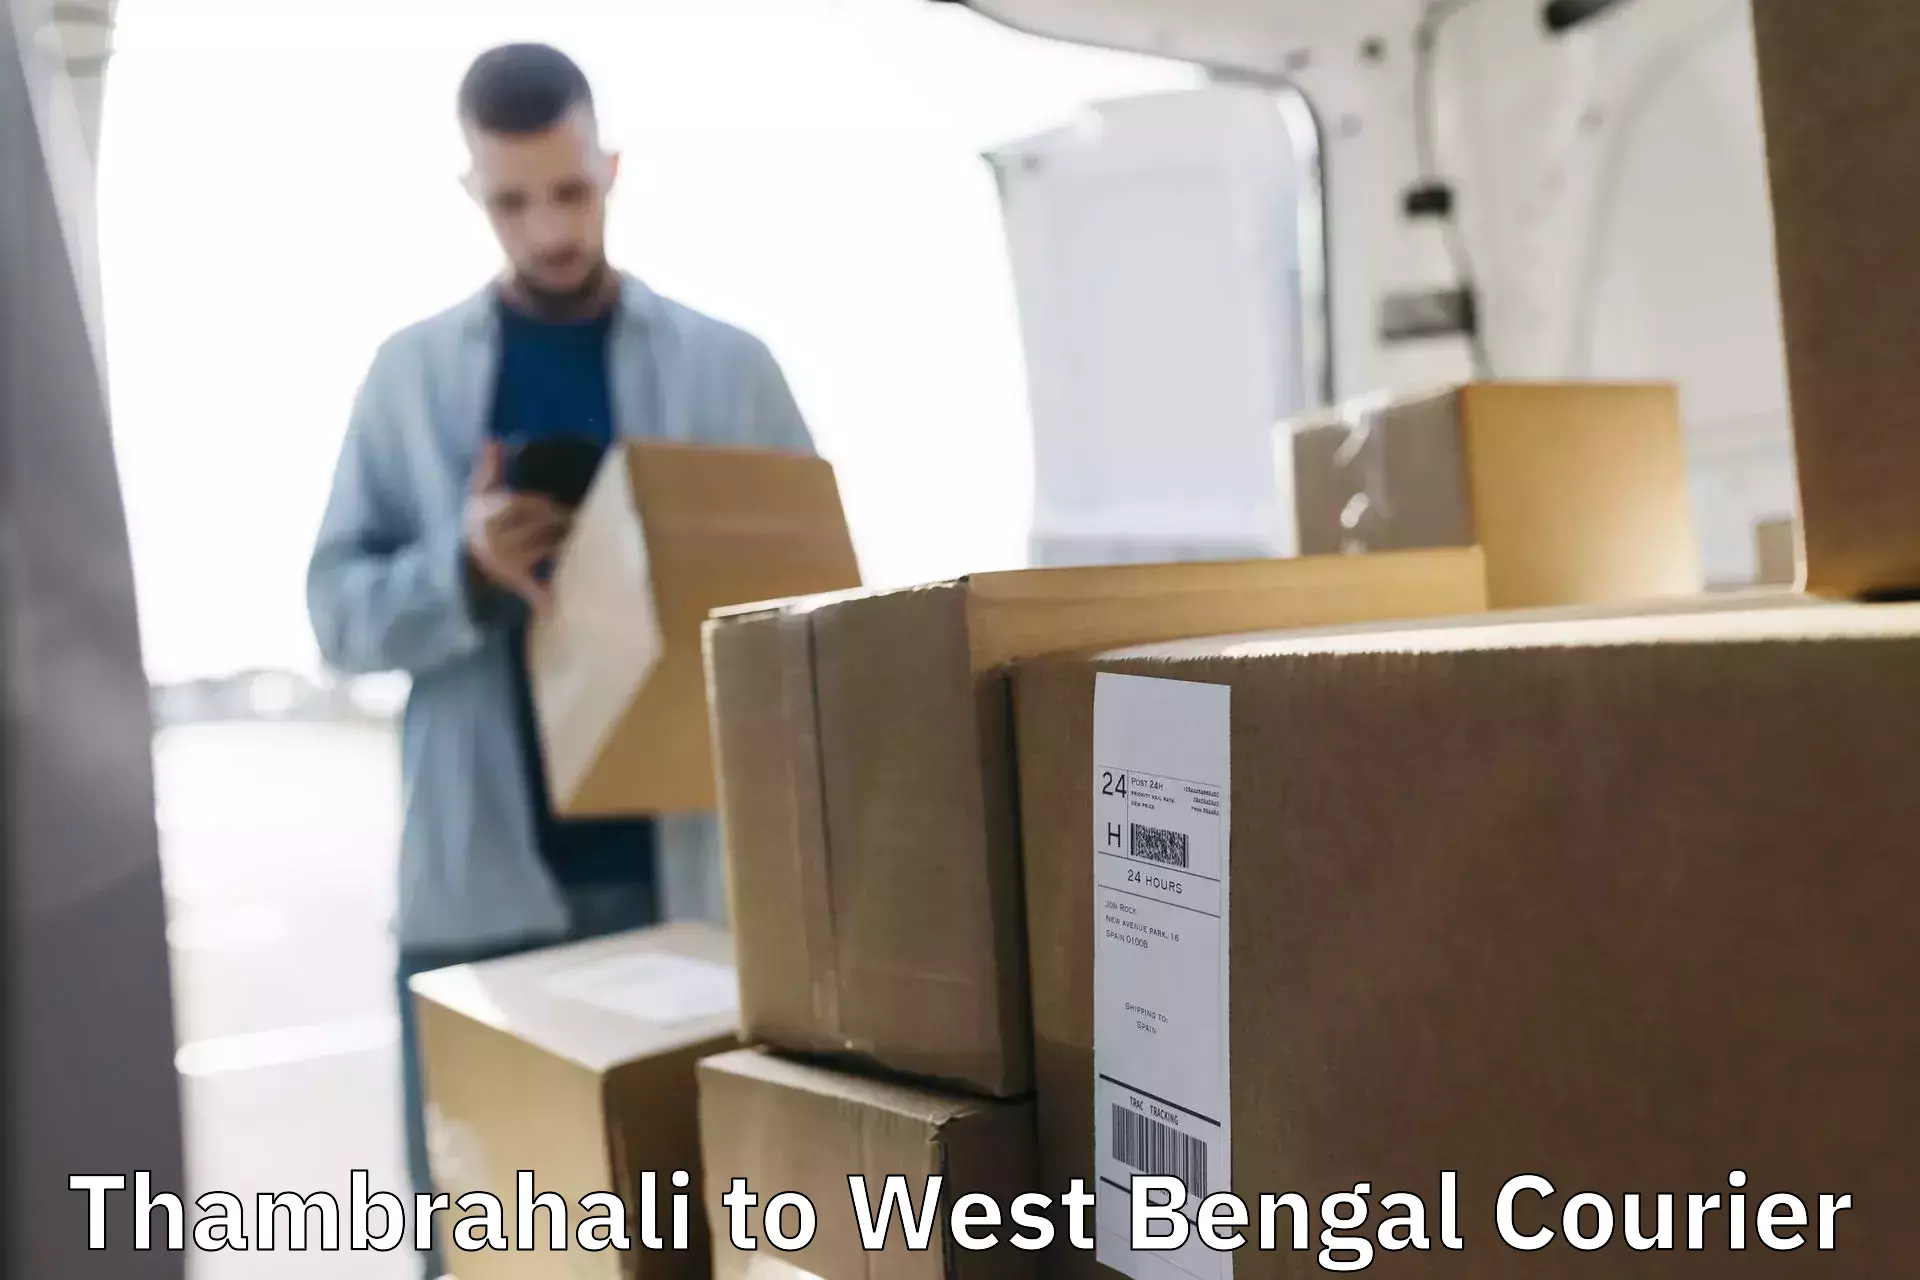 Regular parcel service Thambrahali to Canning